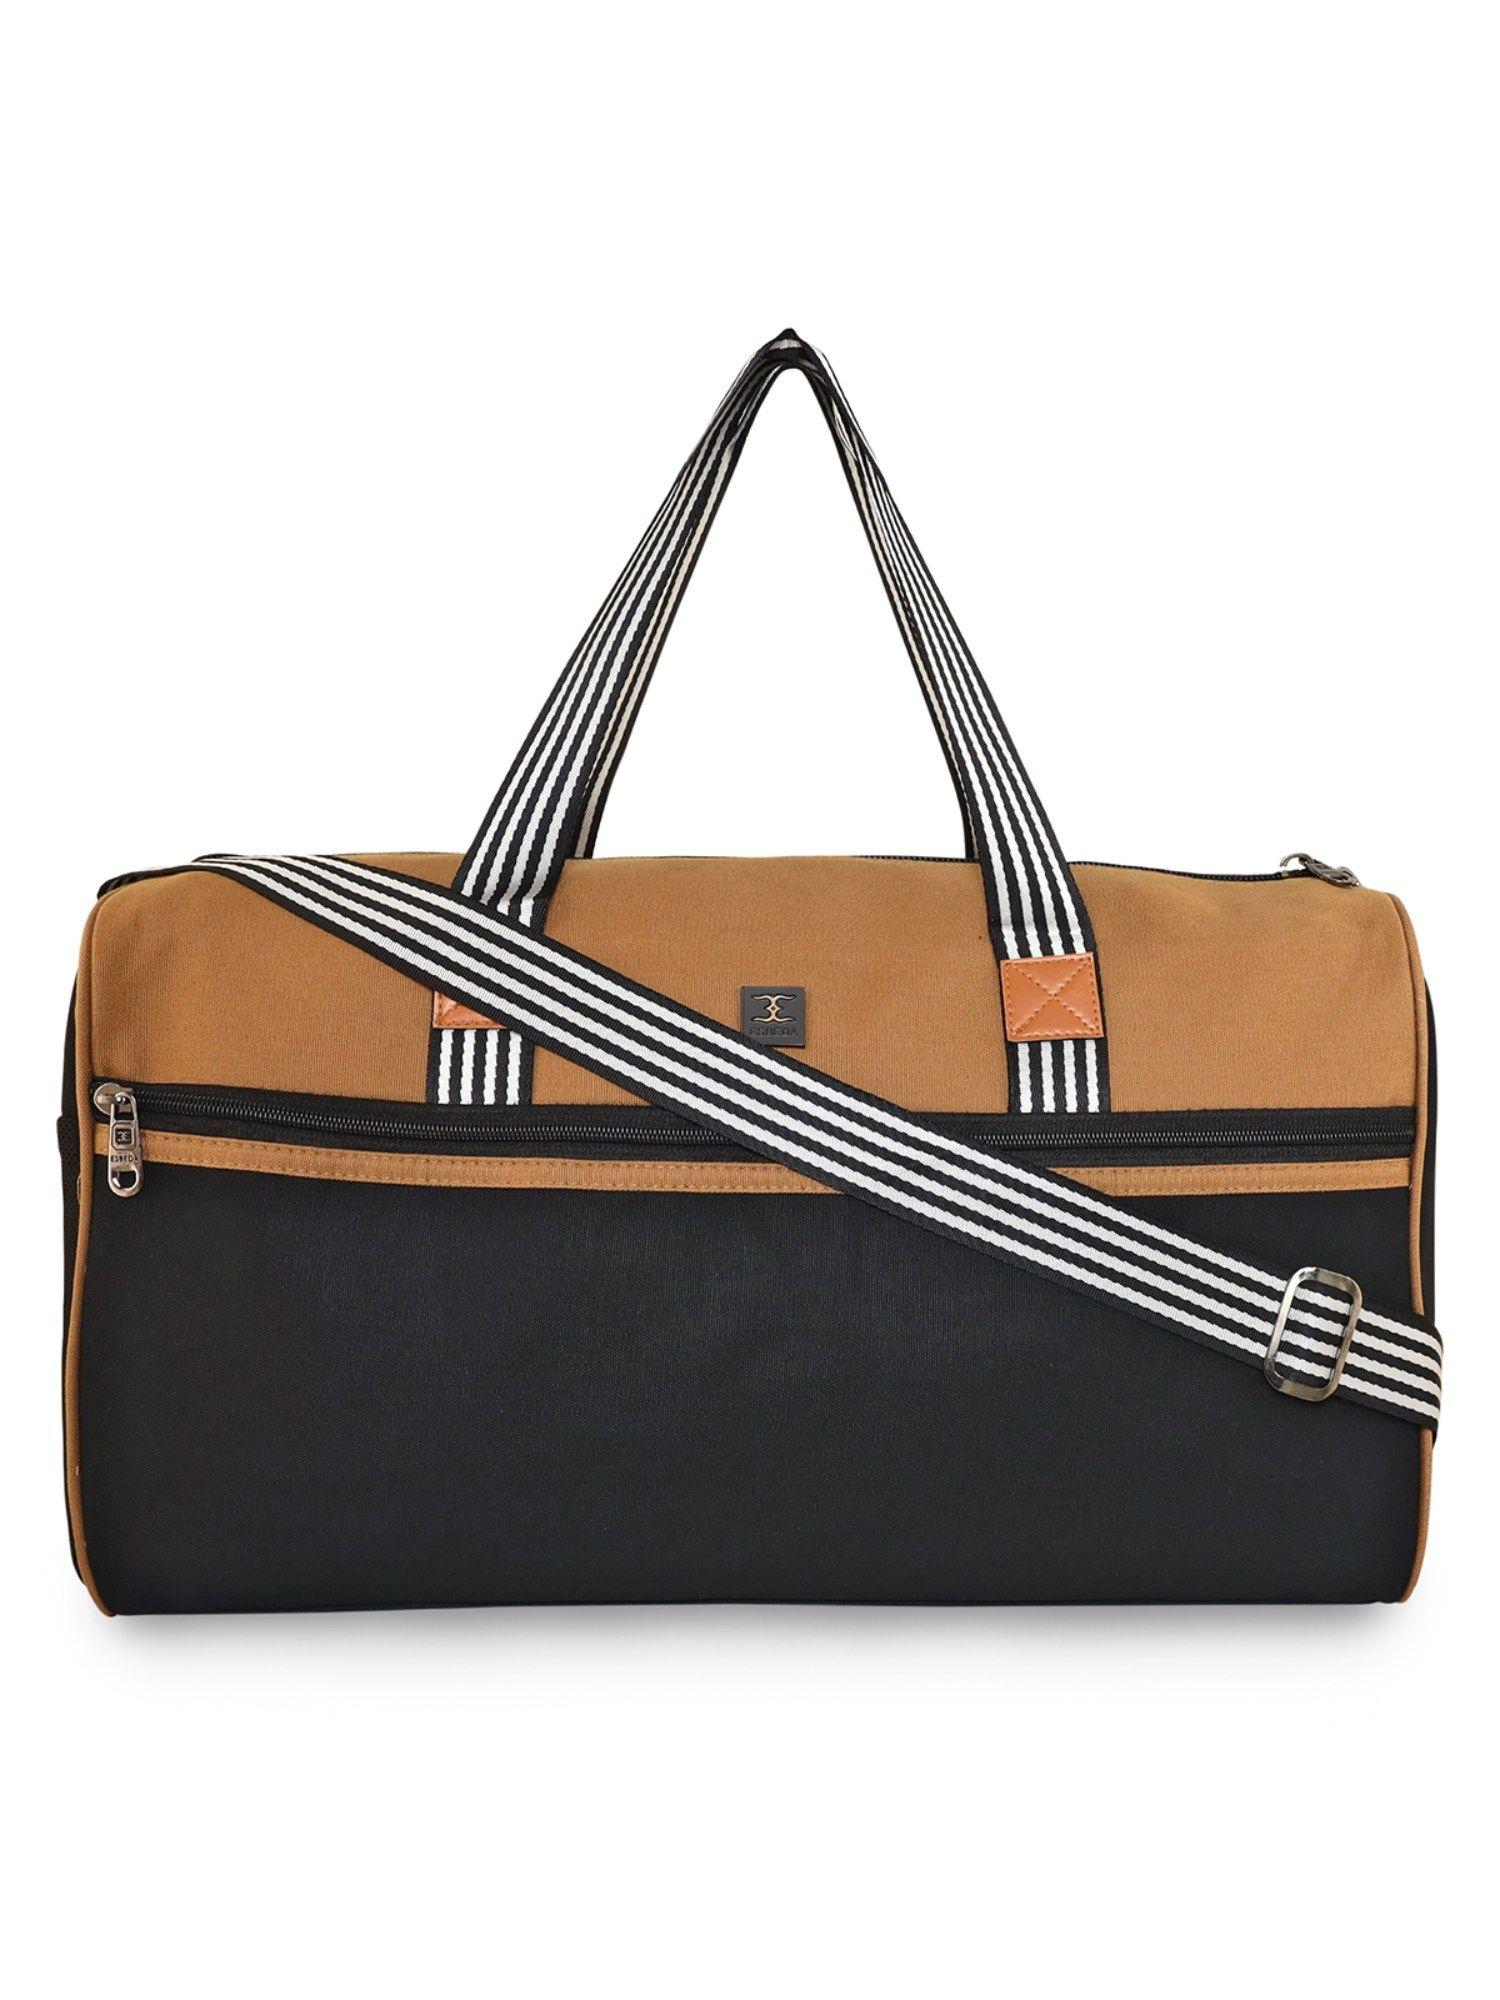 tan-black color newly launched duffle bag for mens & womens